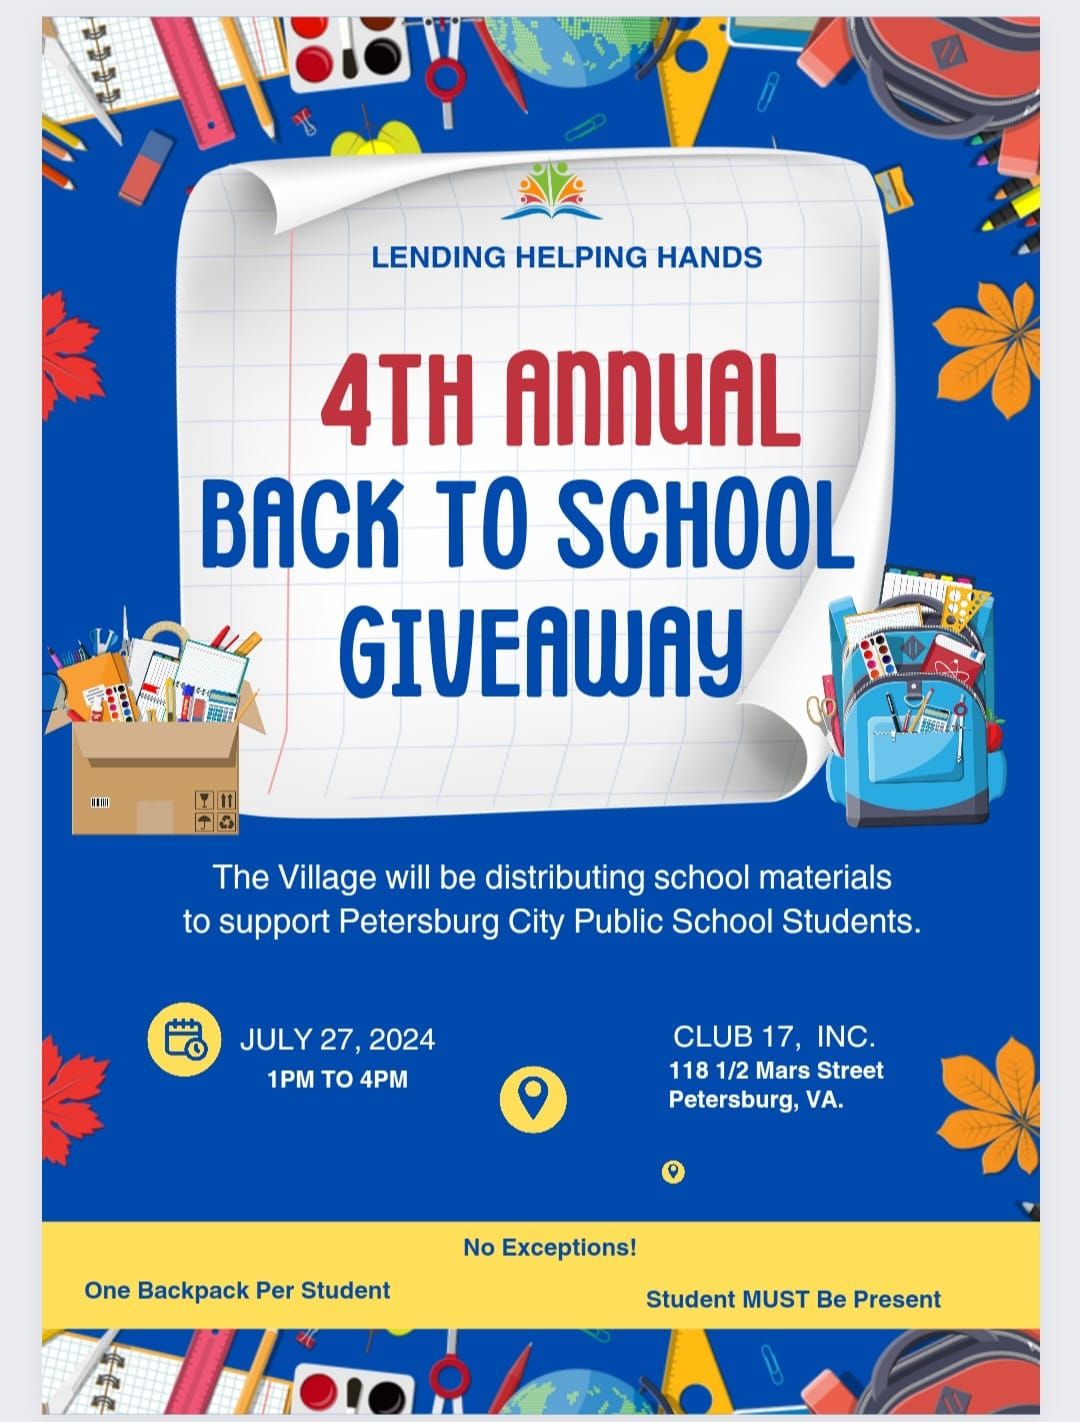 4th Annual Back to School Giveaway